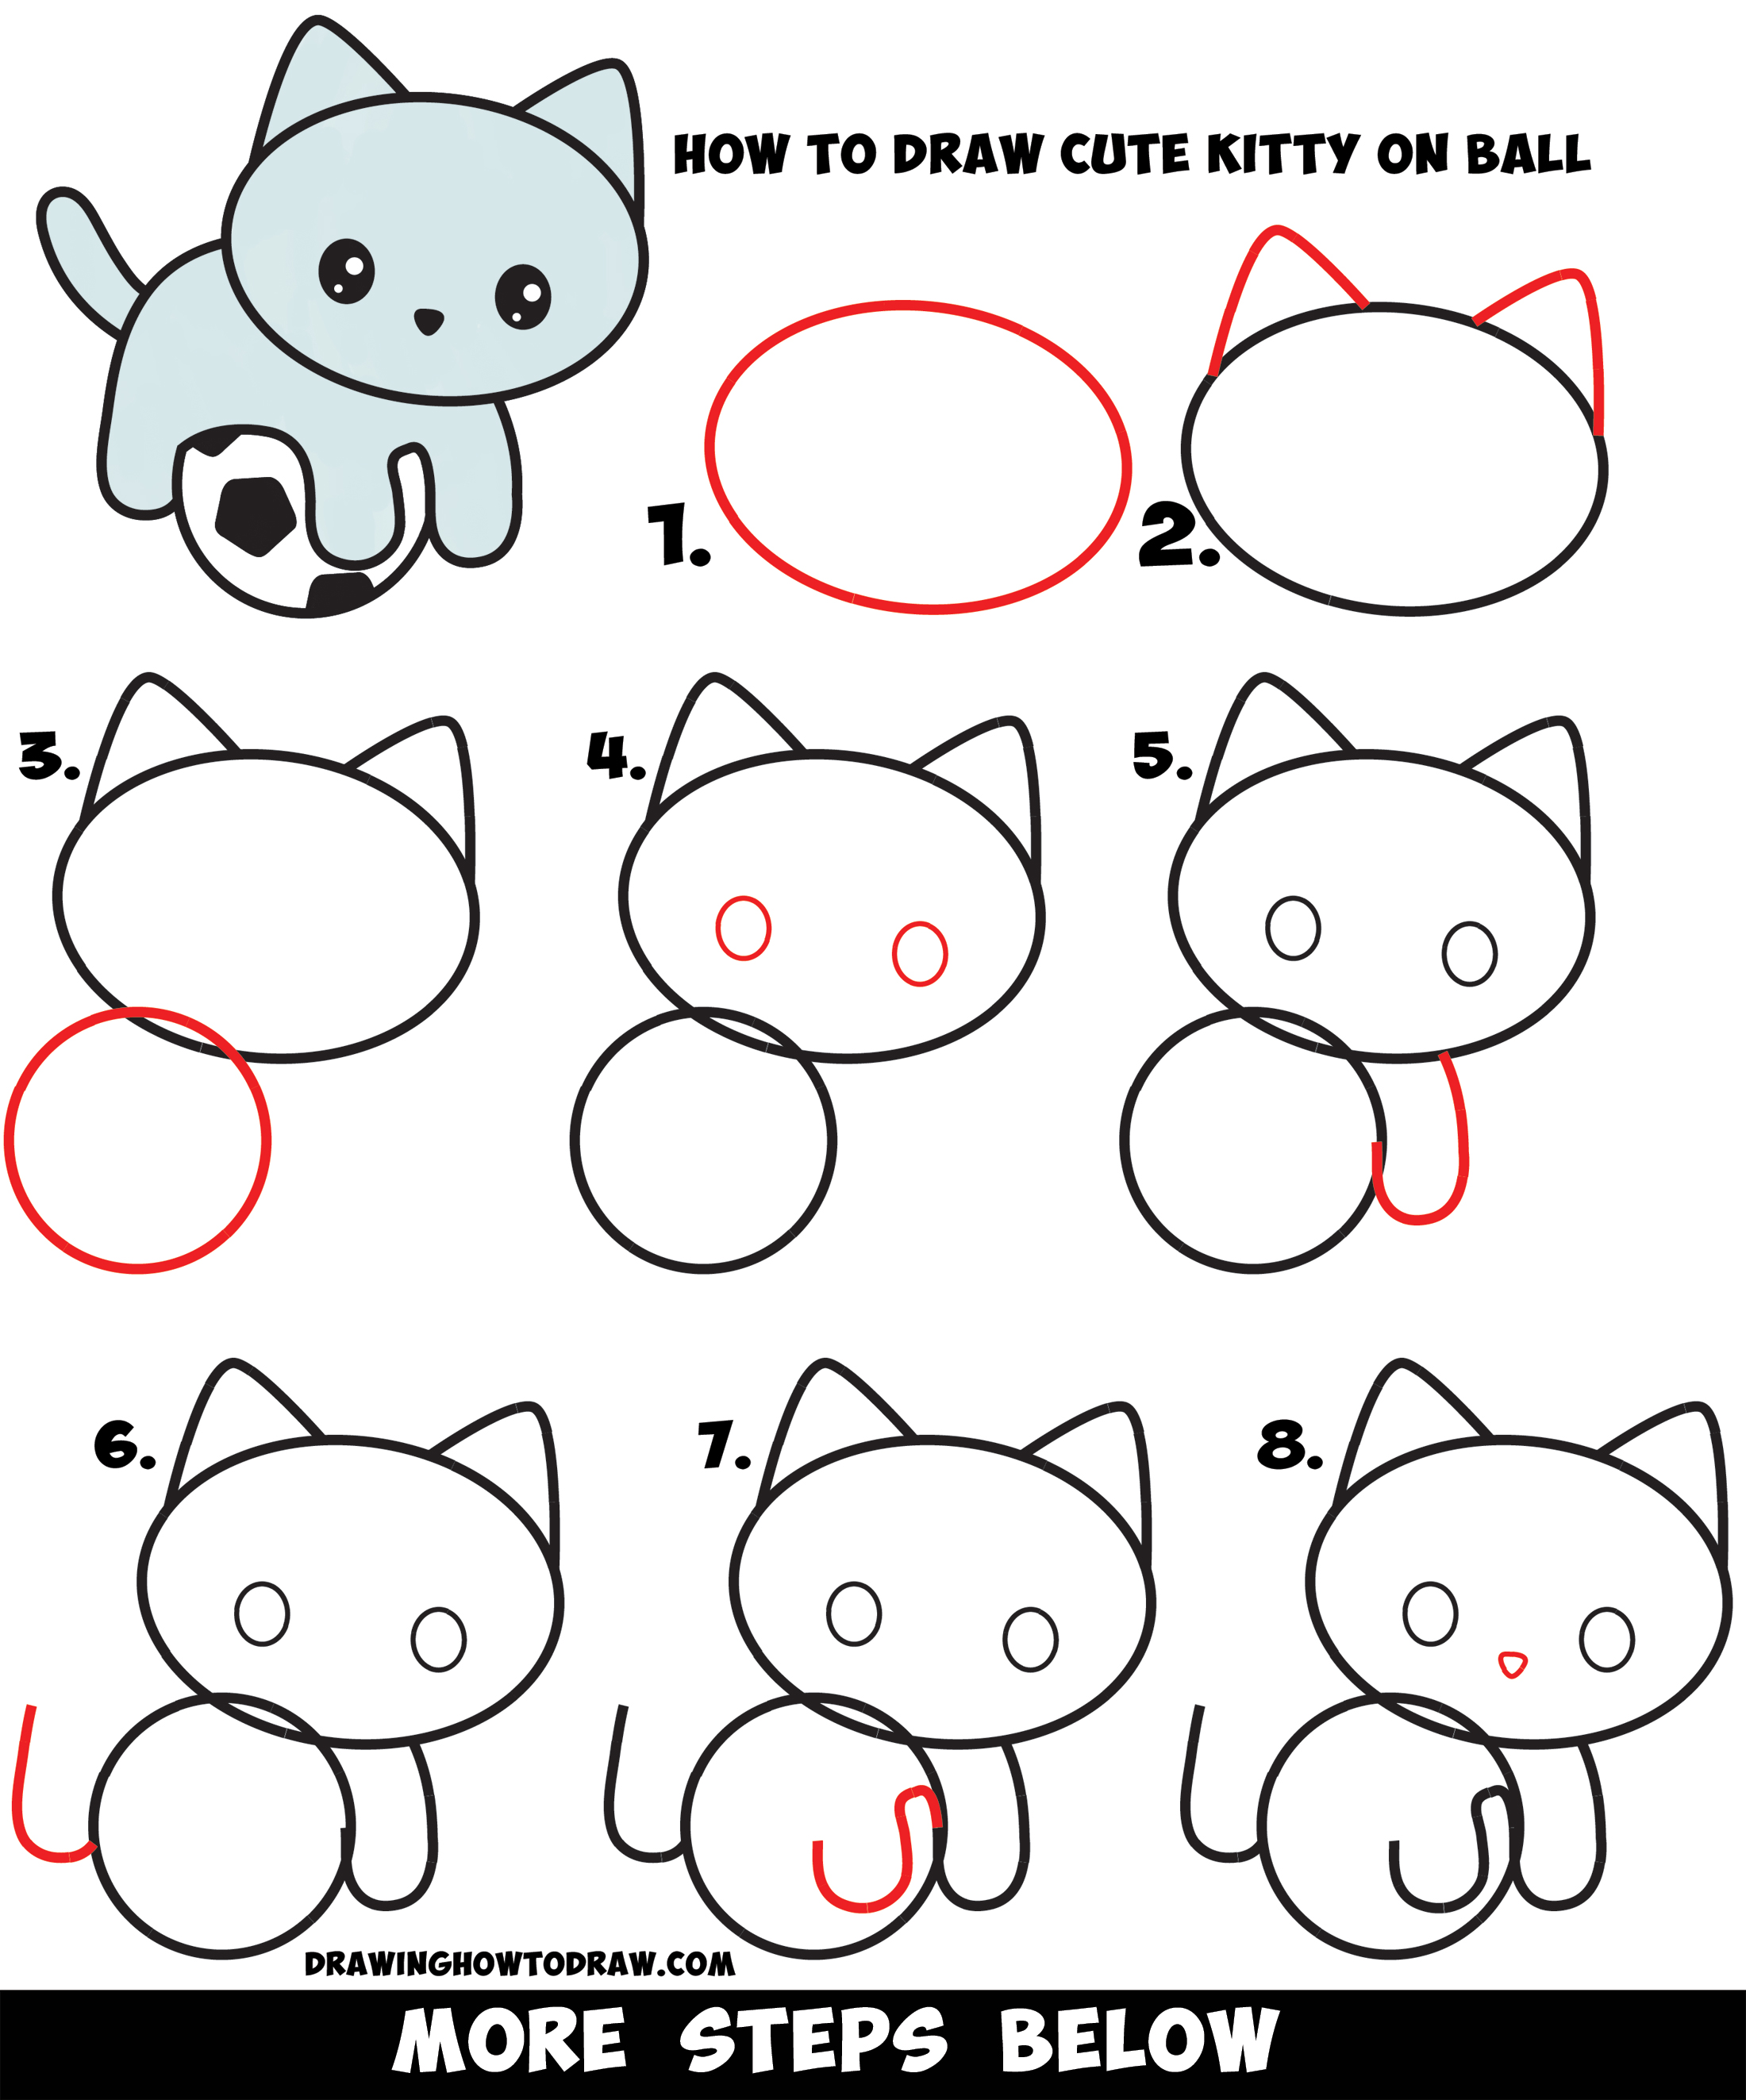 How To Draw A Cute Kitten Playing On A Soccer Ball Easy Step By Step Drawing Tutorial For Kids How To Draw Step By Step Drawing Tutorials